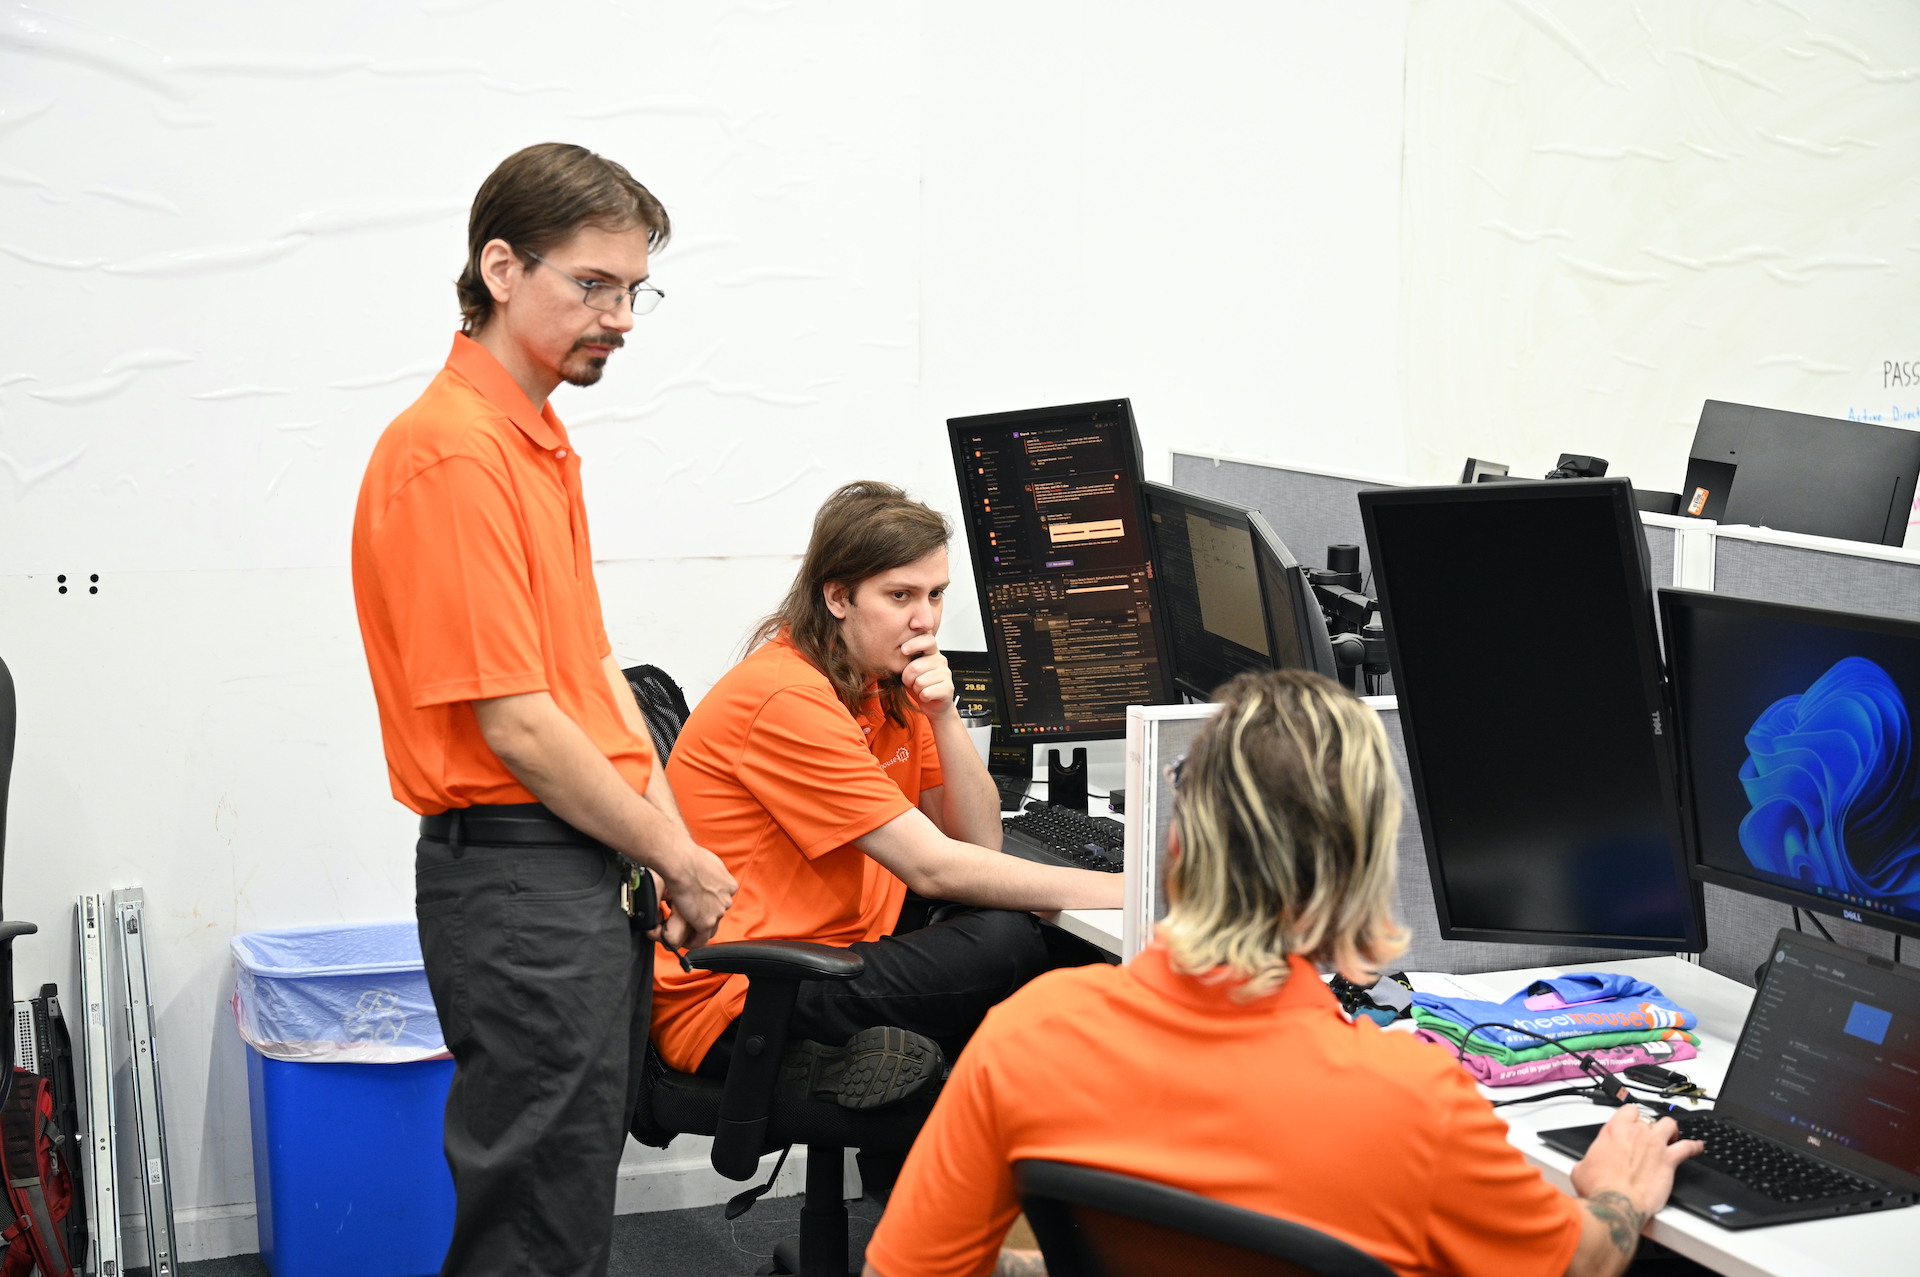 two people in orange shirts working on computers